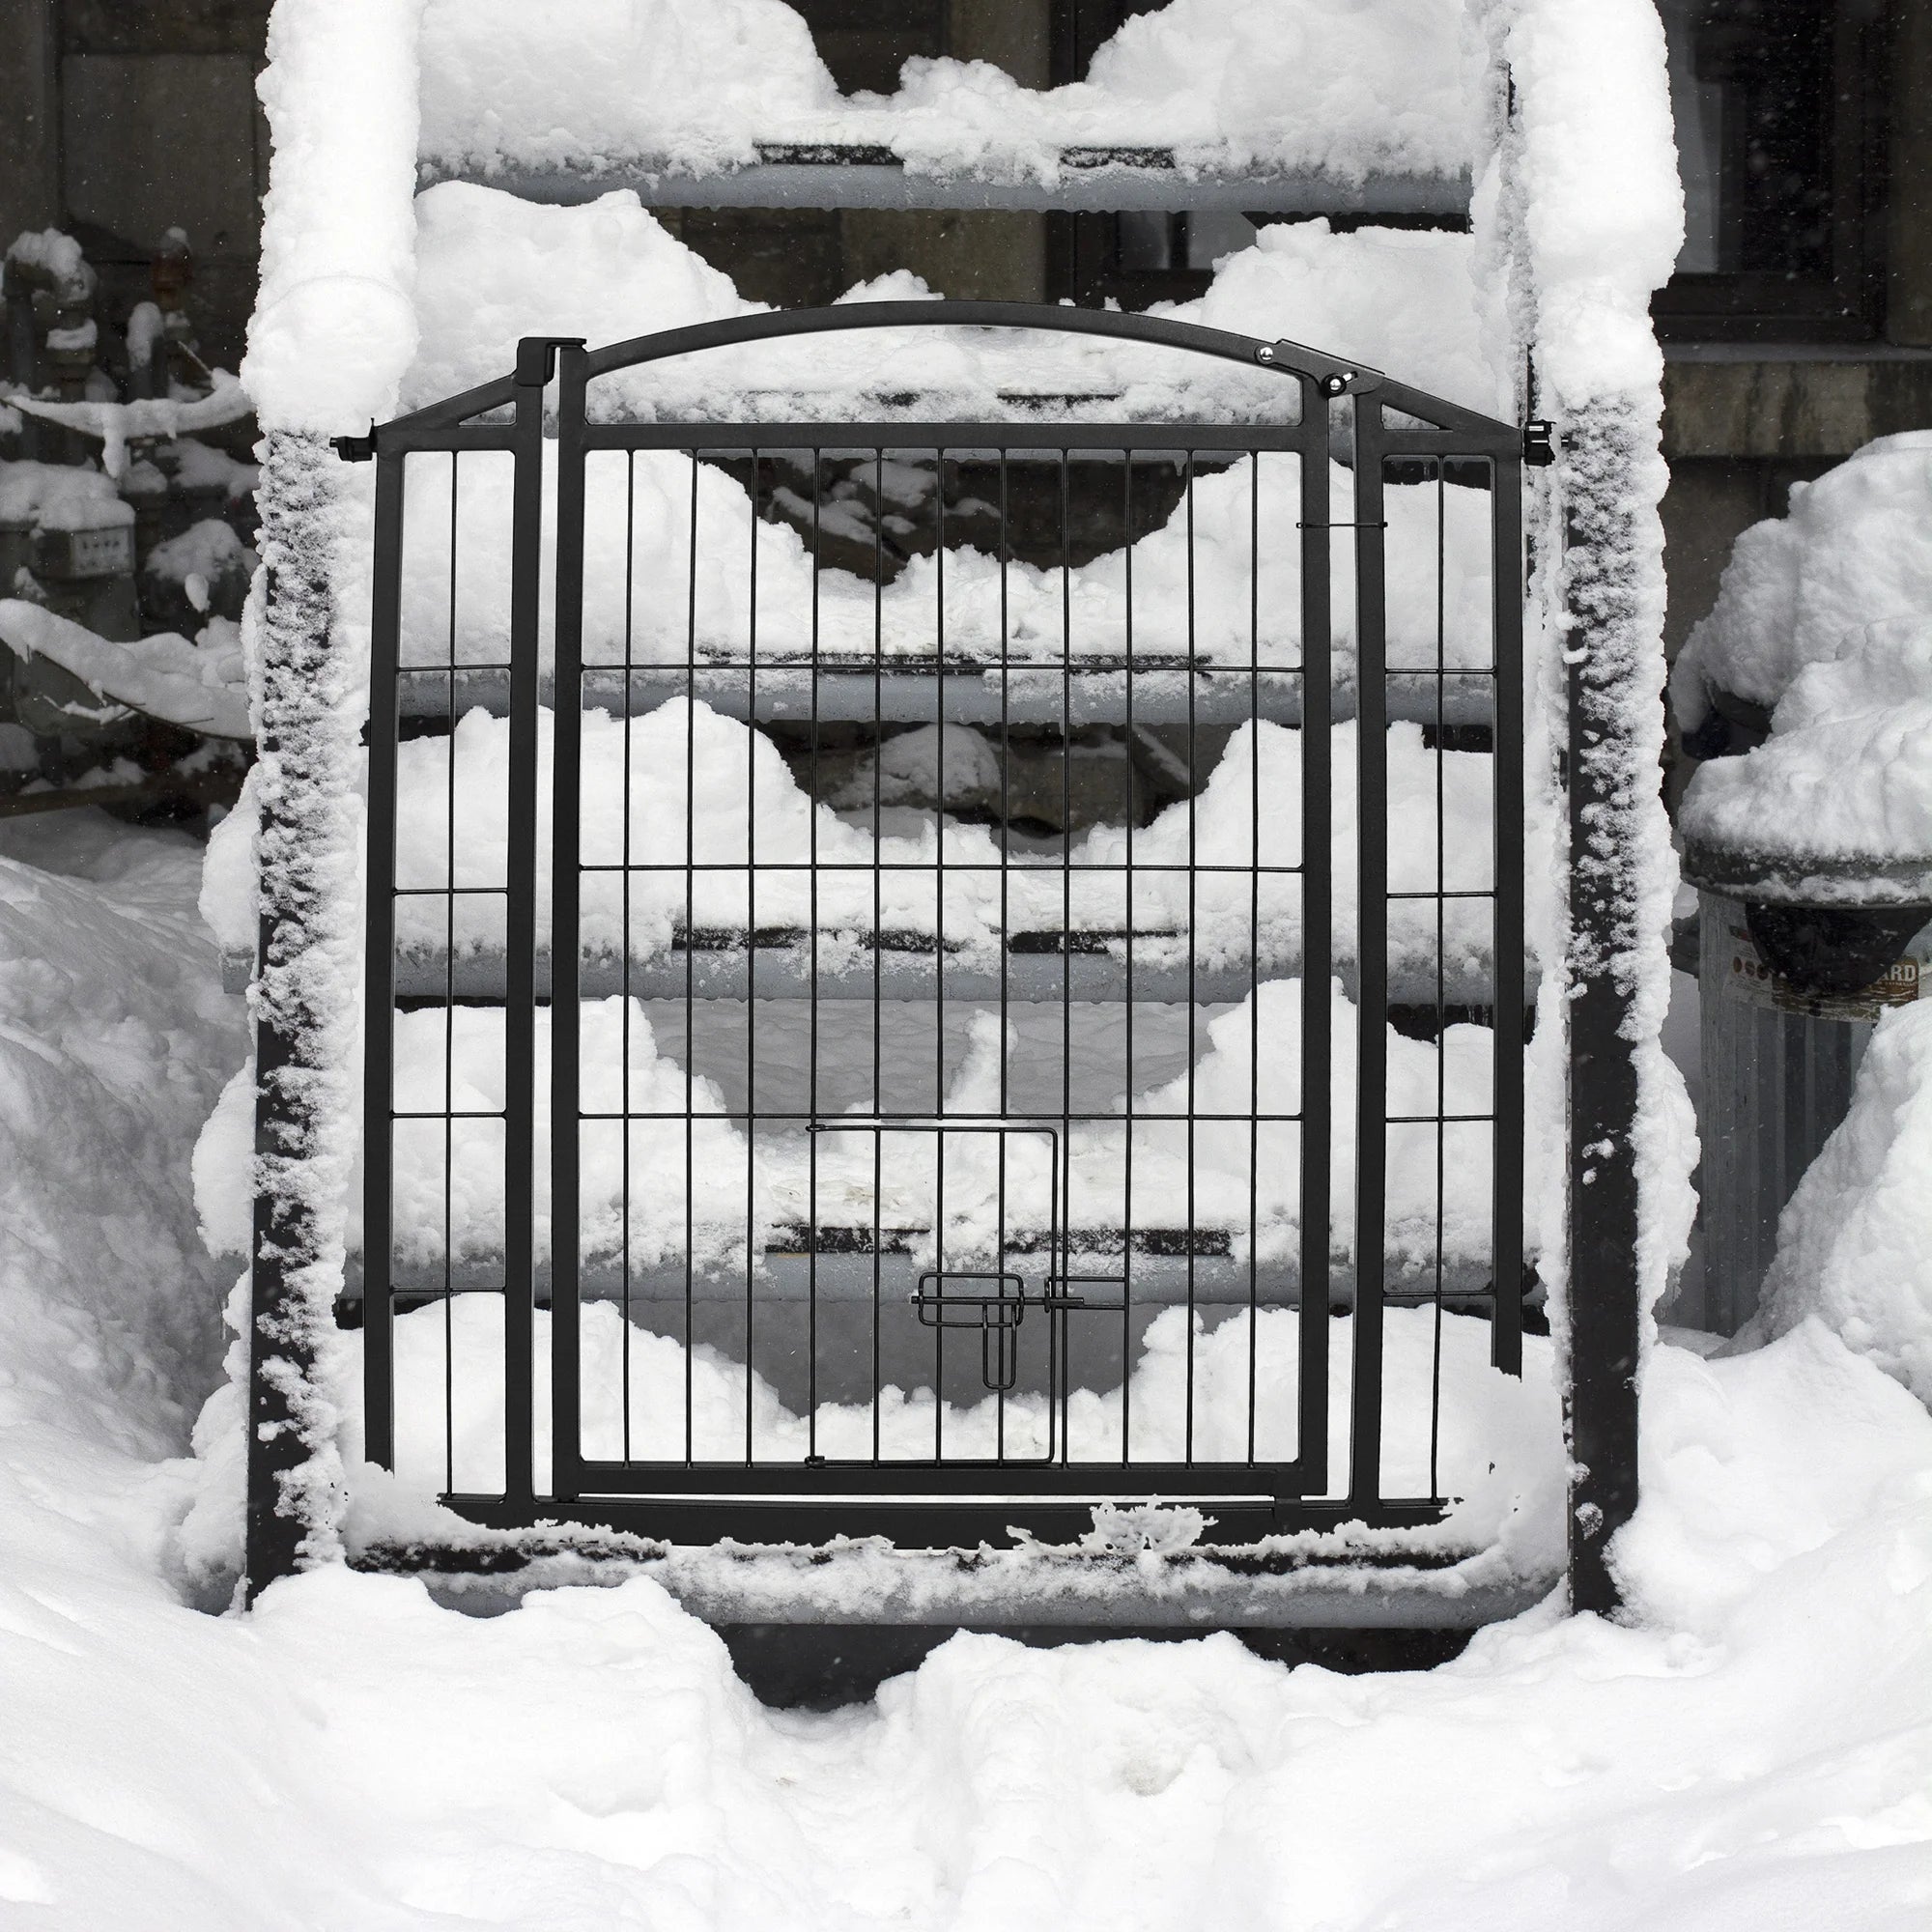 Outdoor Walk-Thru Pet Gate set up on a snowy staircase.